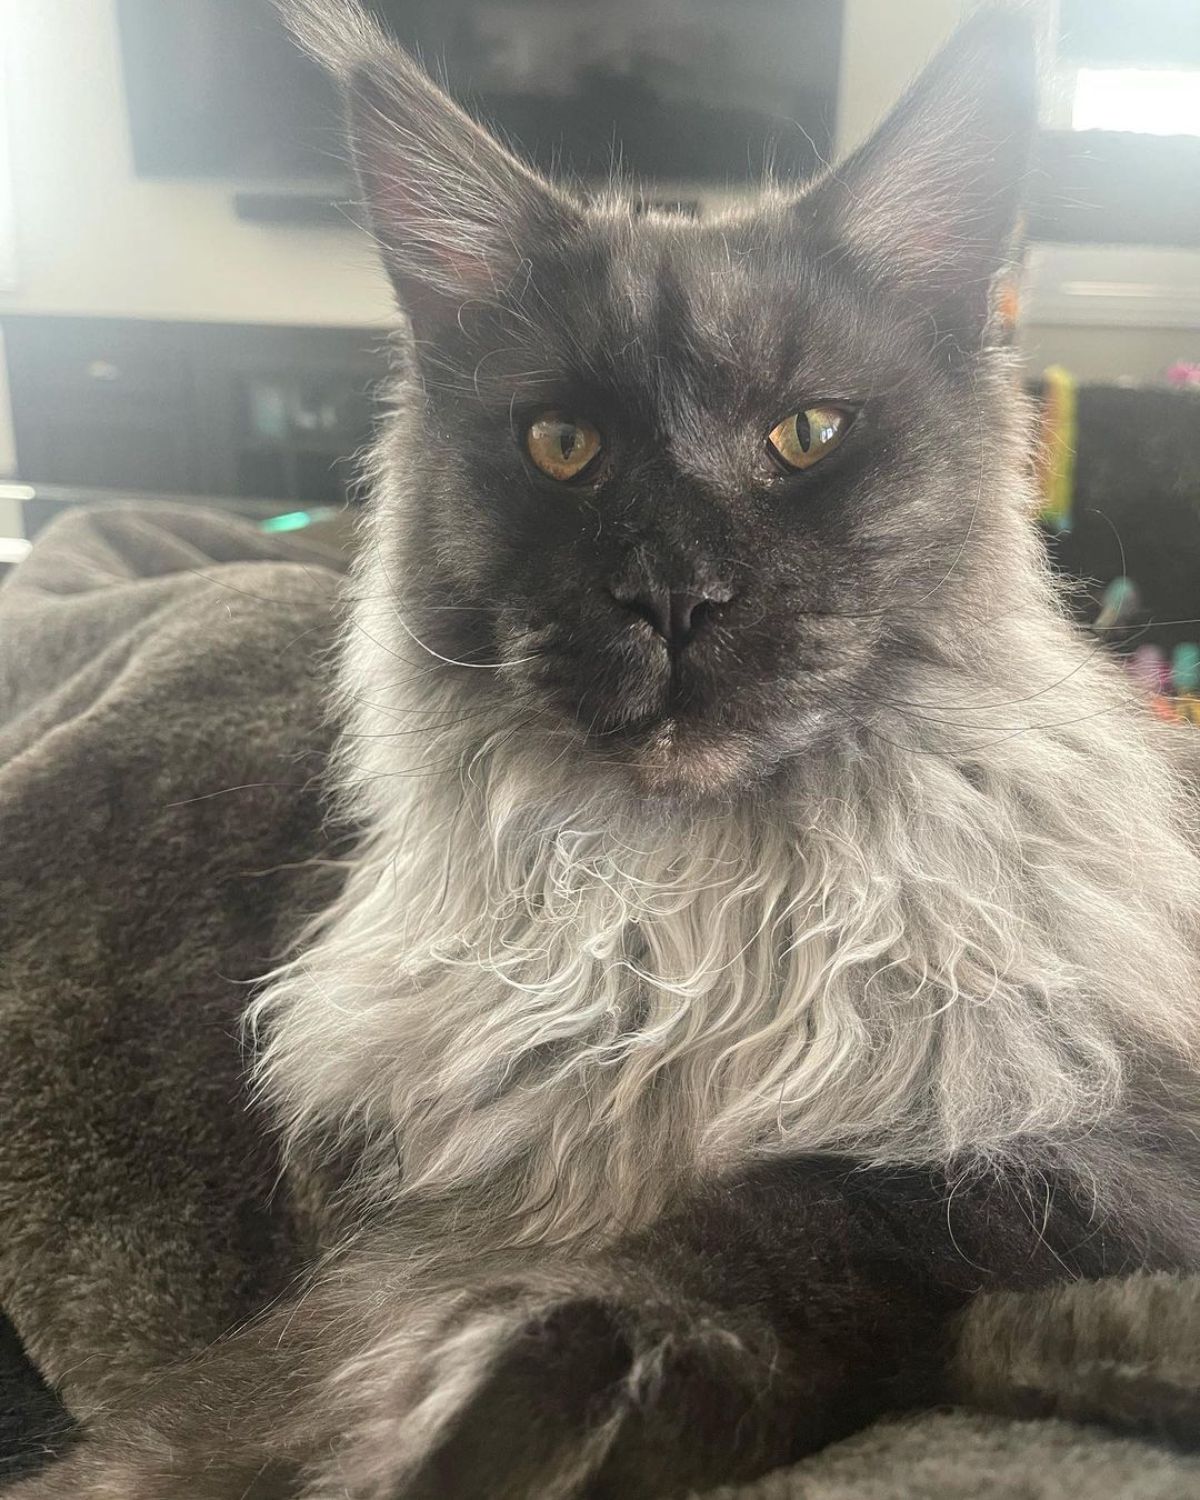 A close-up of a fluffy black smoke maine coon under a gray blanket.